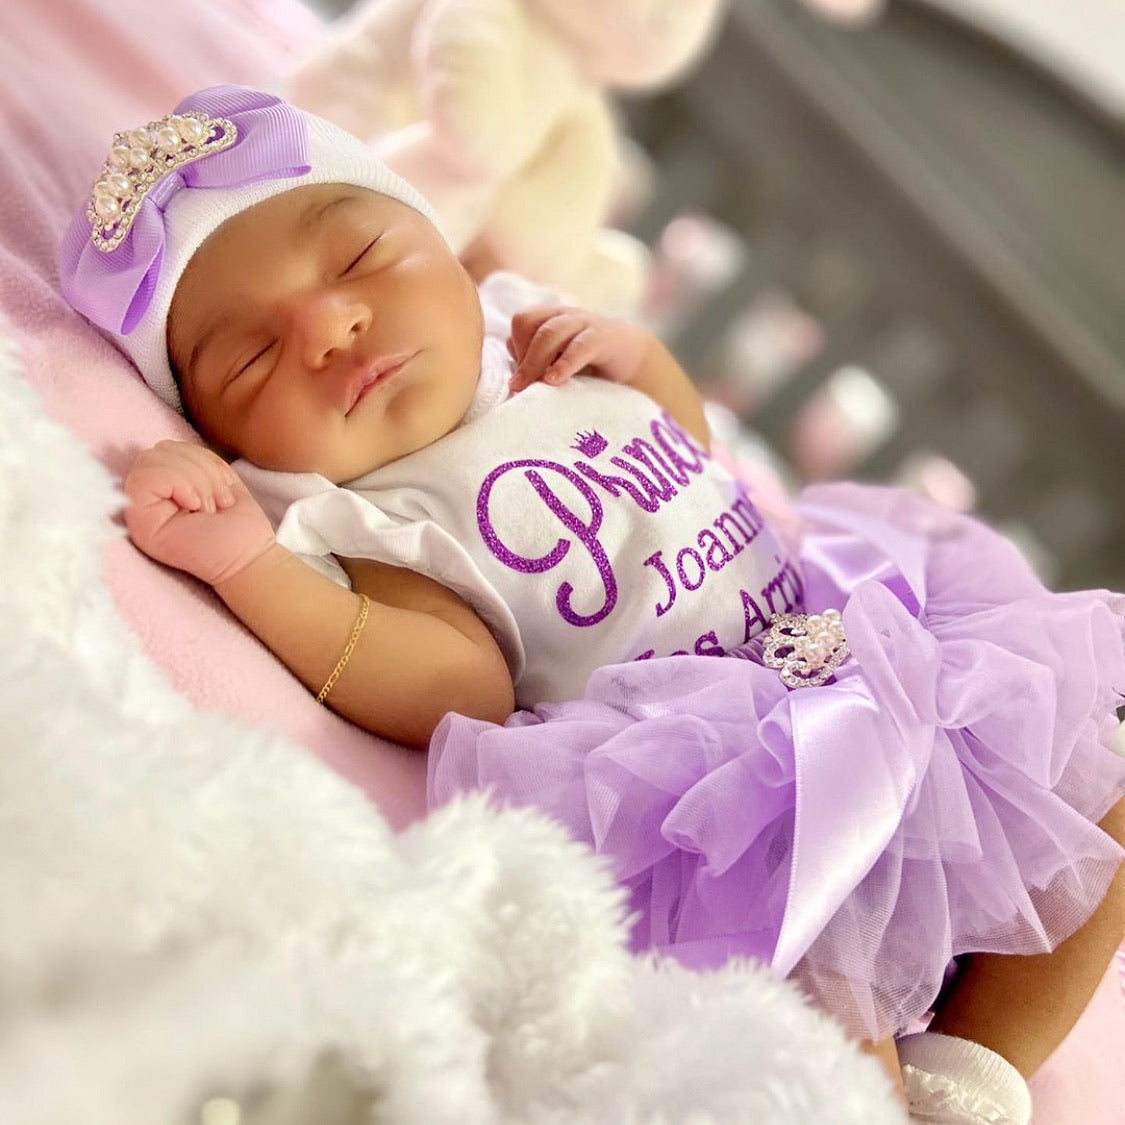 take home outfit baby gift newborn bodysuit The princess has arrived Custom name newborn headband custom bodysuit come home outfit babyshower gift baby headband Come home 